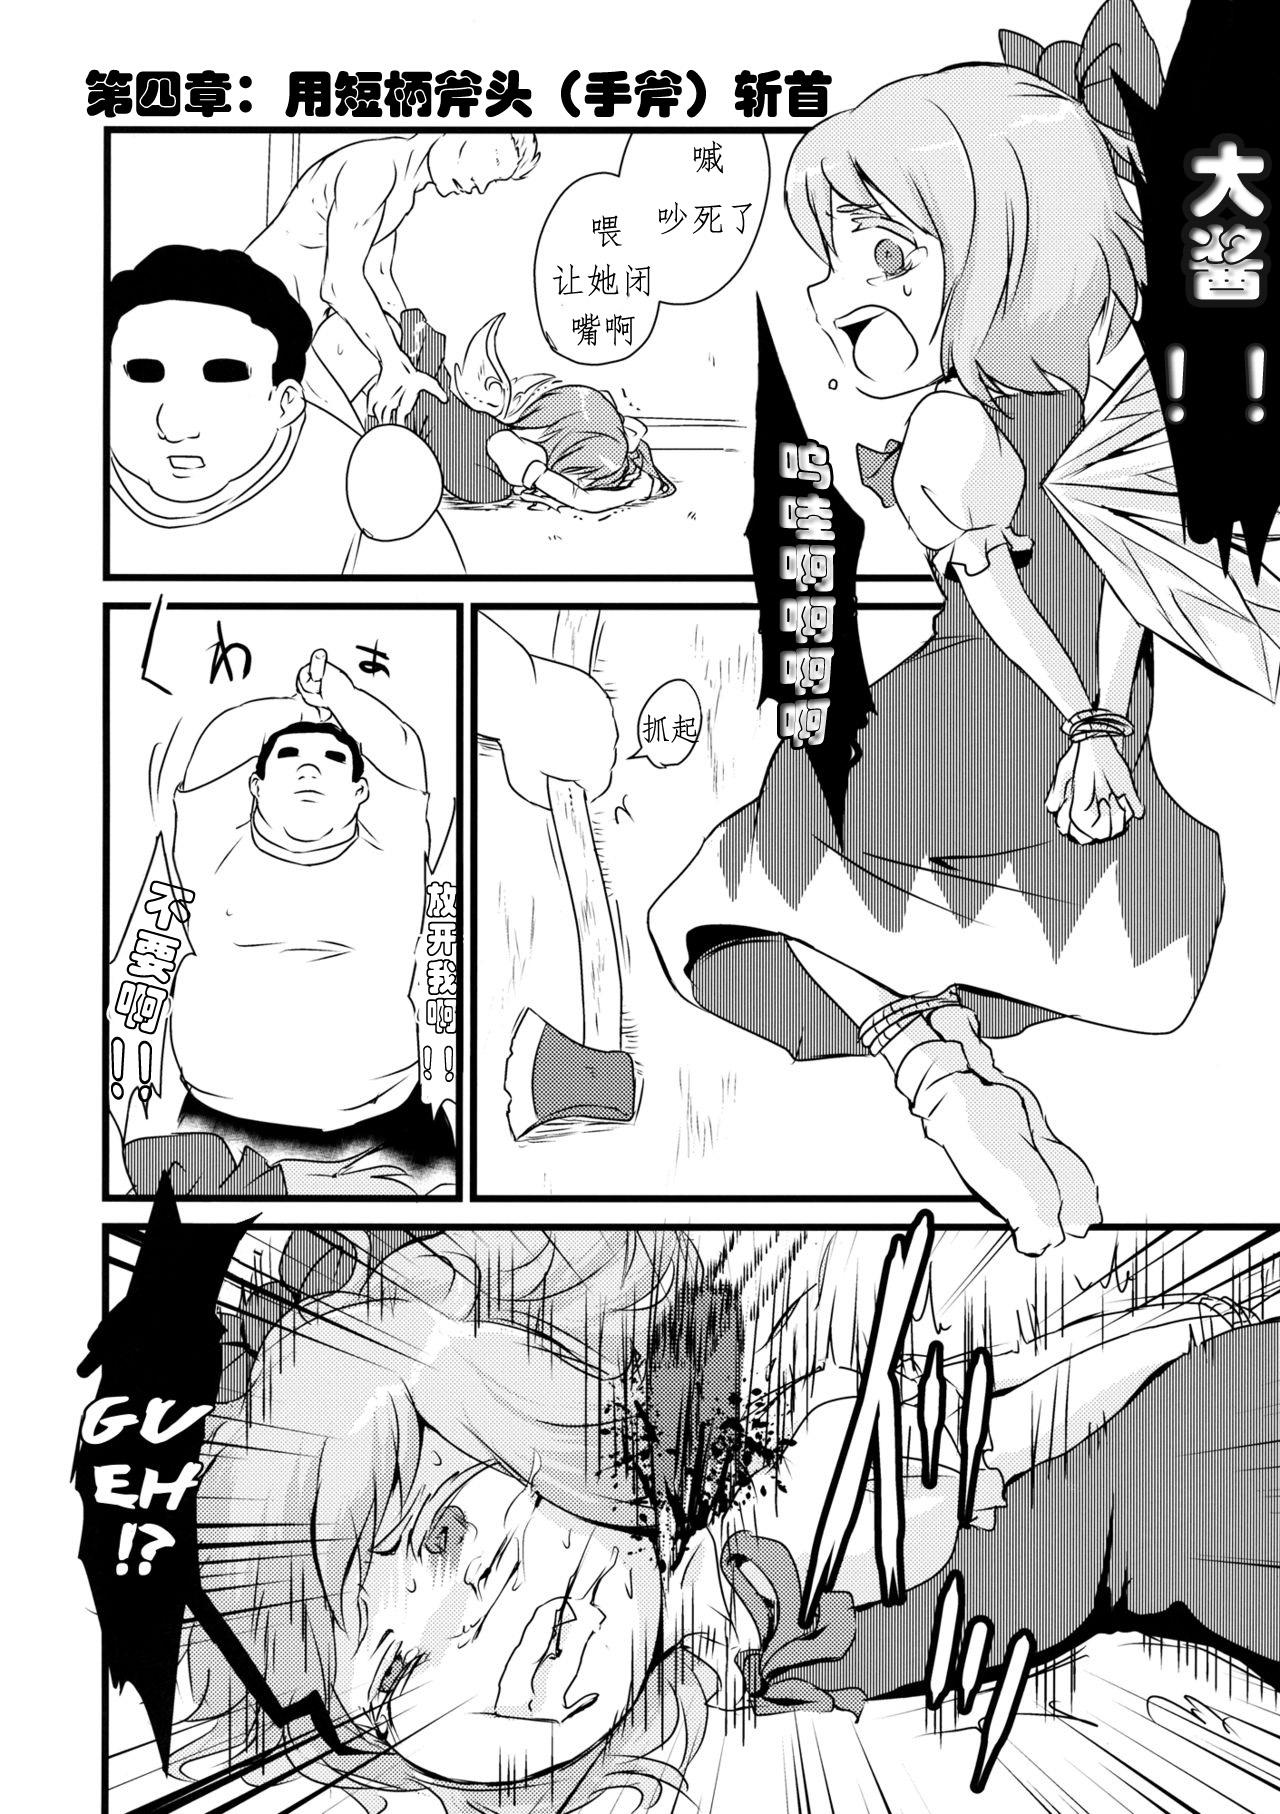 Glamour Porn 2P de Shinu Hon | The Dying In 2P Book - Touhou project Fisting - Page 10